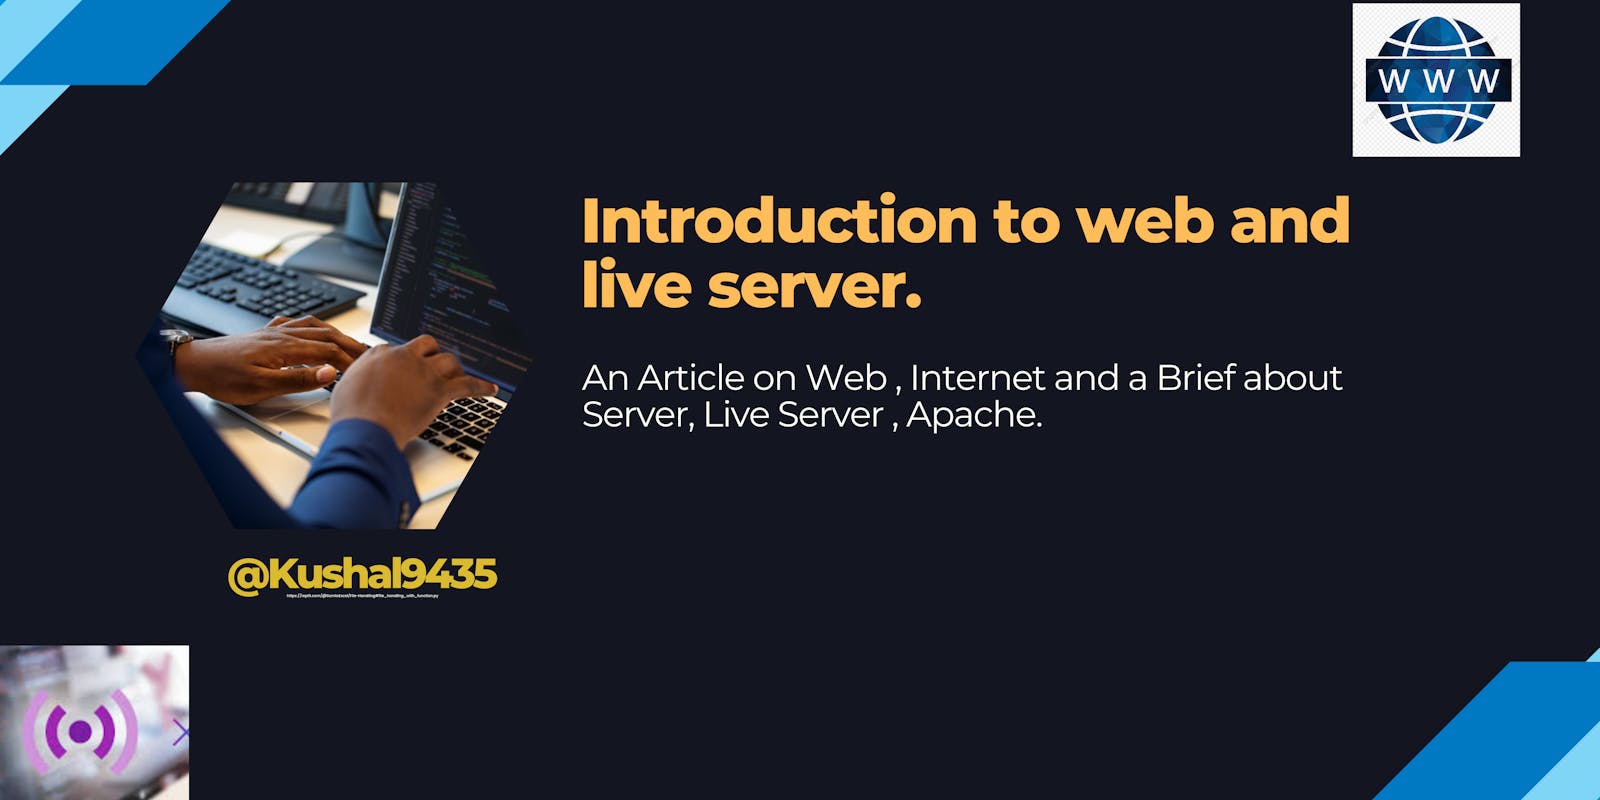 Introduction to web and live server.